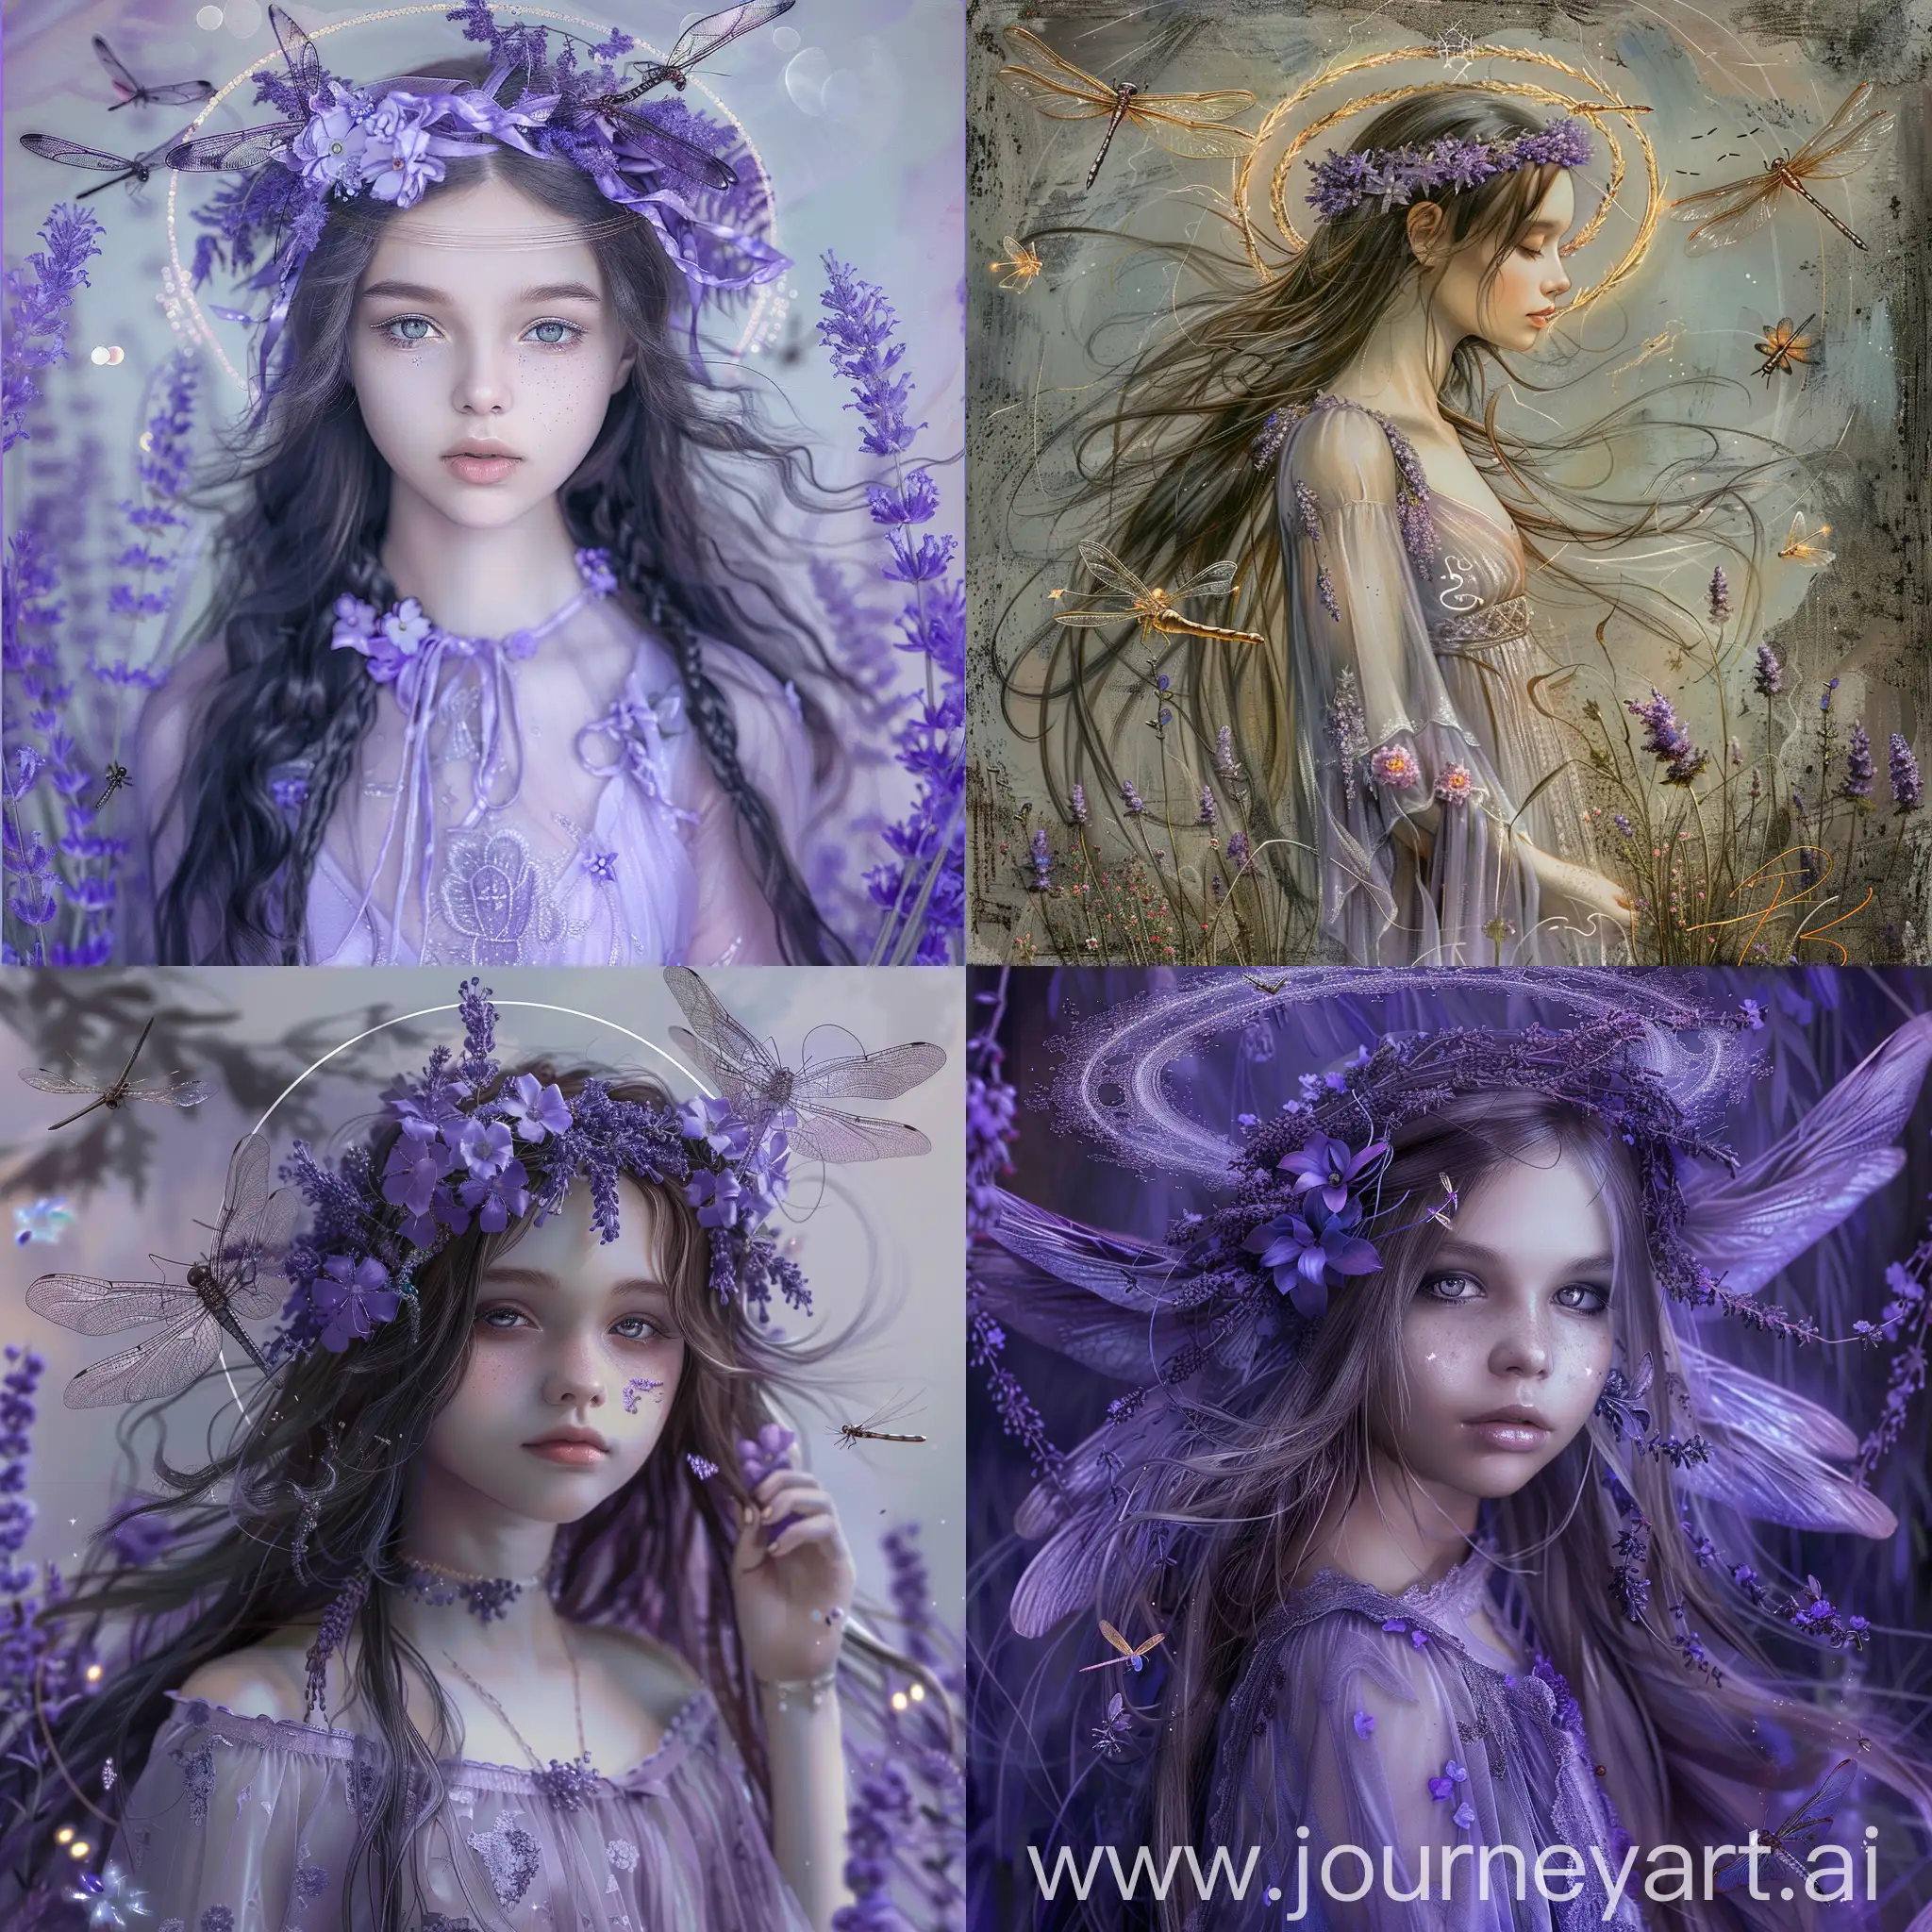 A gentle girl with a halo above her head, a saint, love for the world, kindness, a magnificent airy translucent lavender-colored dress, lavender-colored flowers in long hair, dragonflies, fireflies